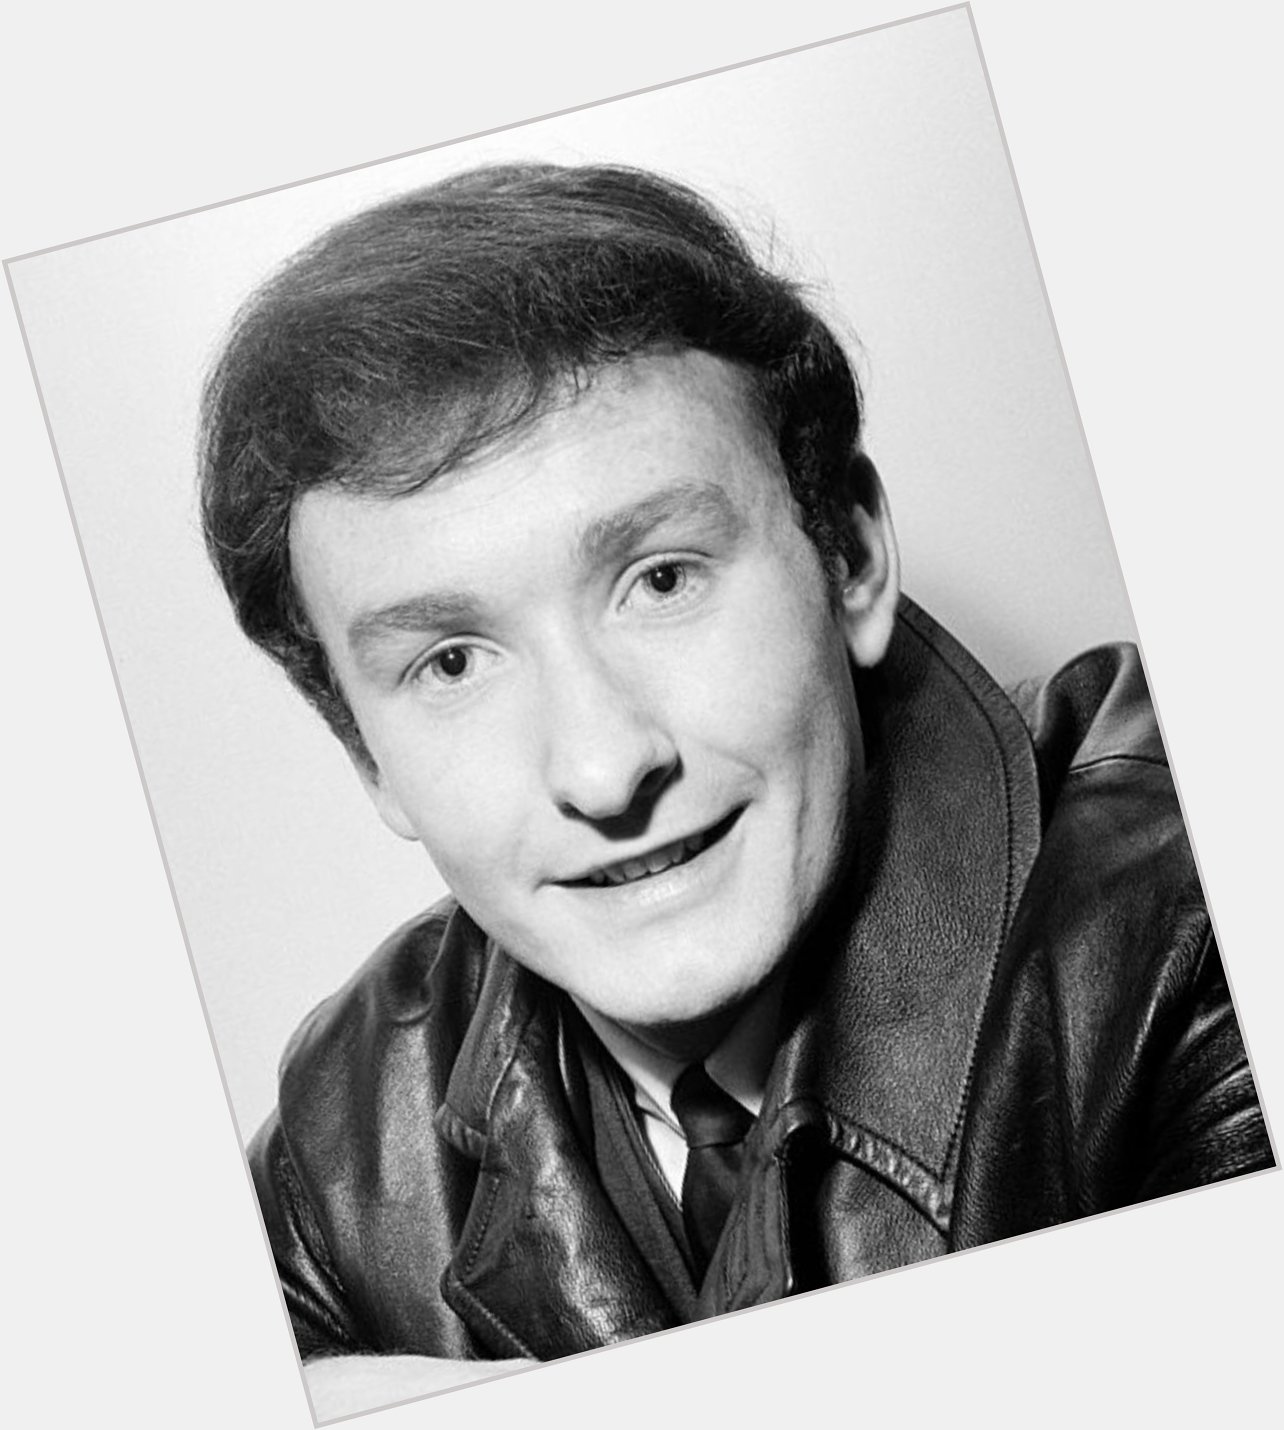 Happy Birthday to The Tremeloes lead vocalist Brian Poole, born on this day in Essex in 1941.   